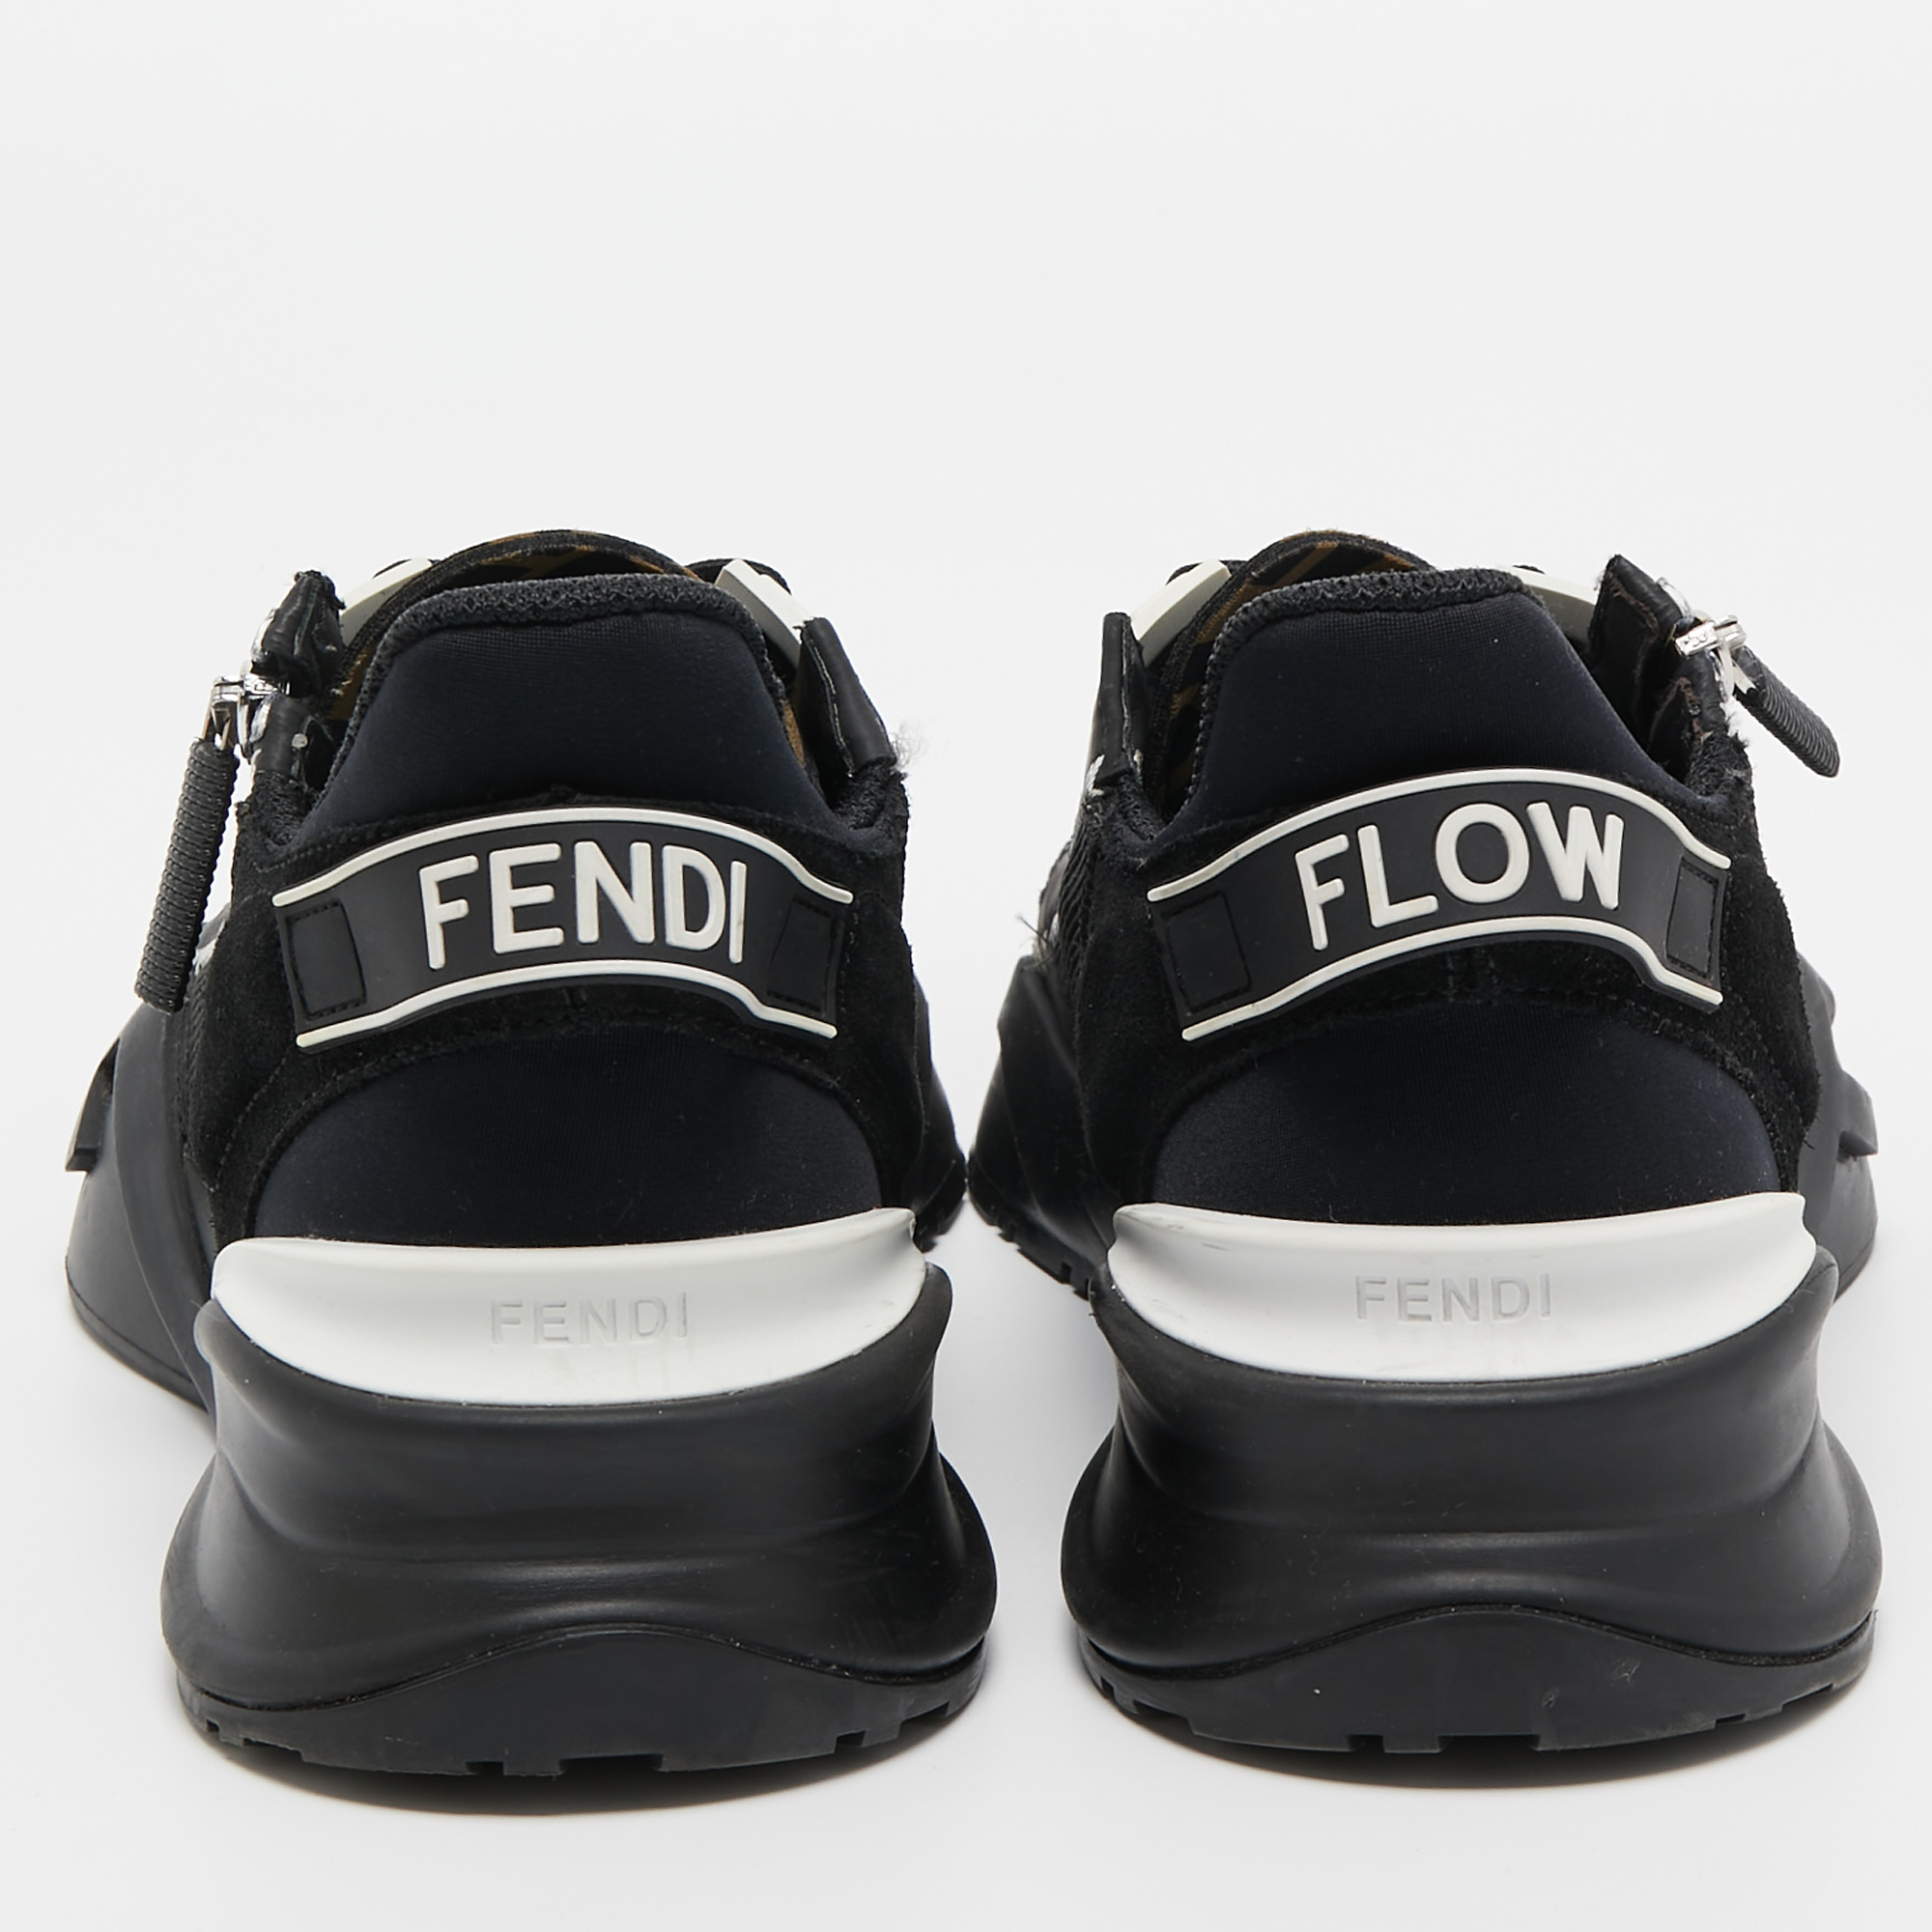 Fendi Black Mesh And Leather Printed Sneakers Size 38.5